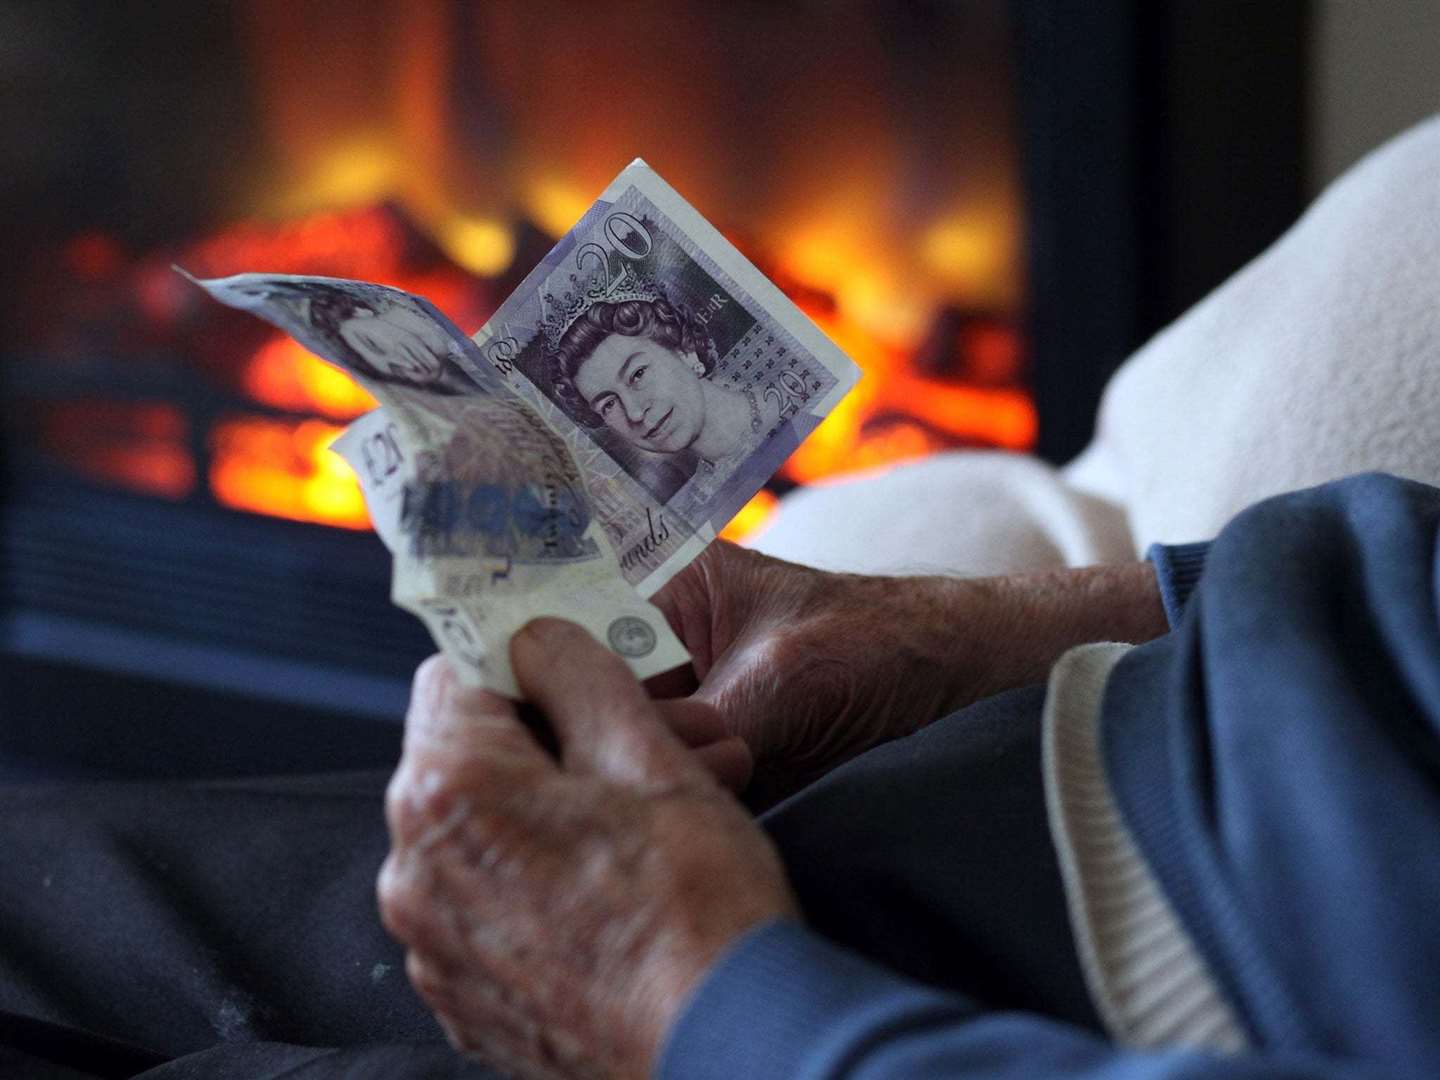 Highland residents struggling with fuel poverty urged to seek help.